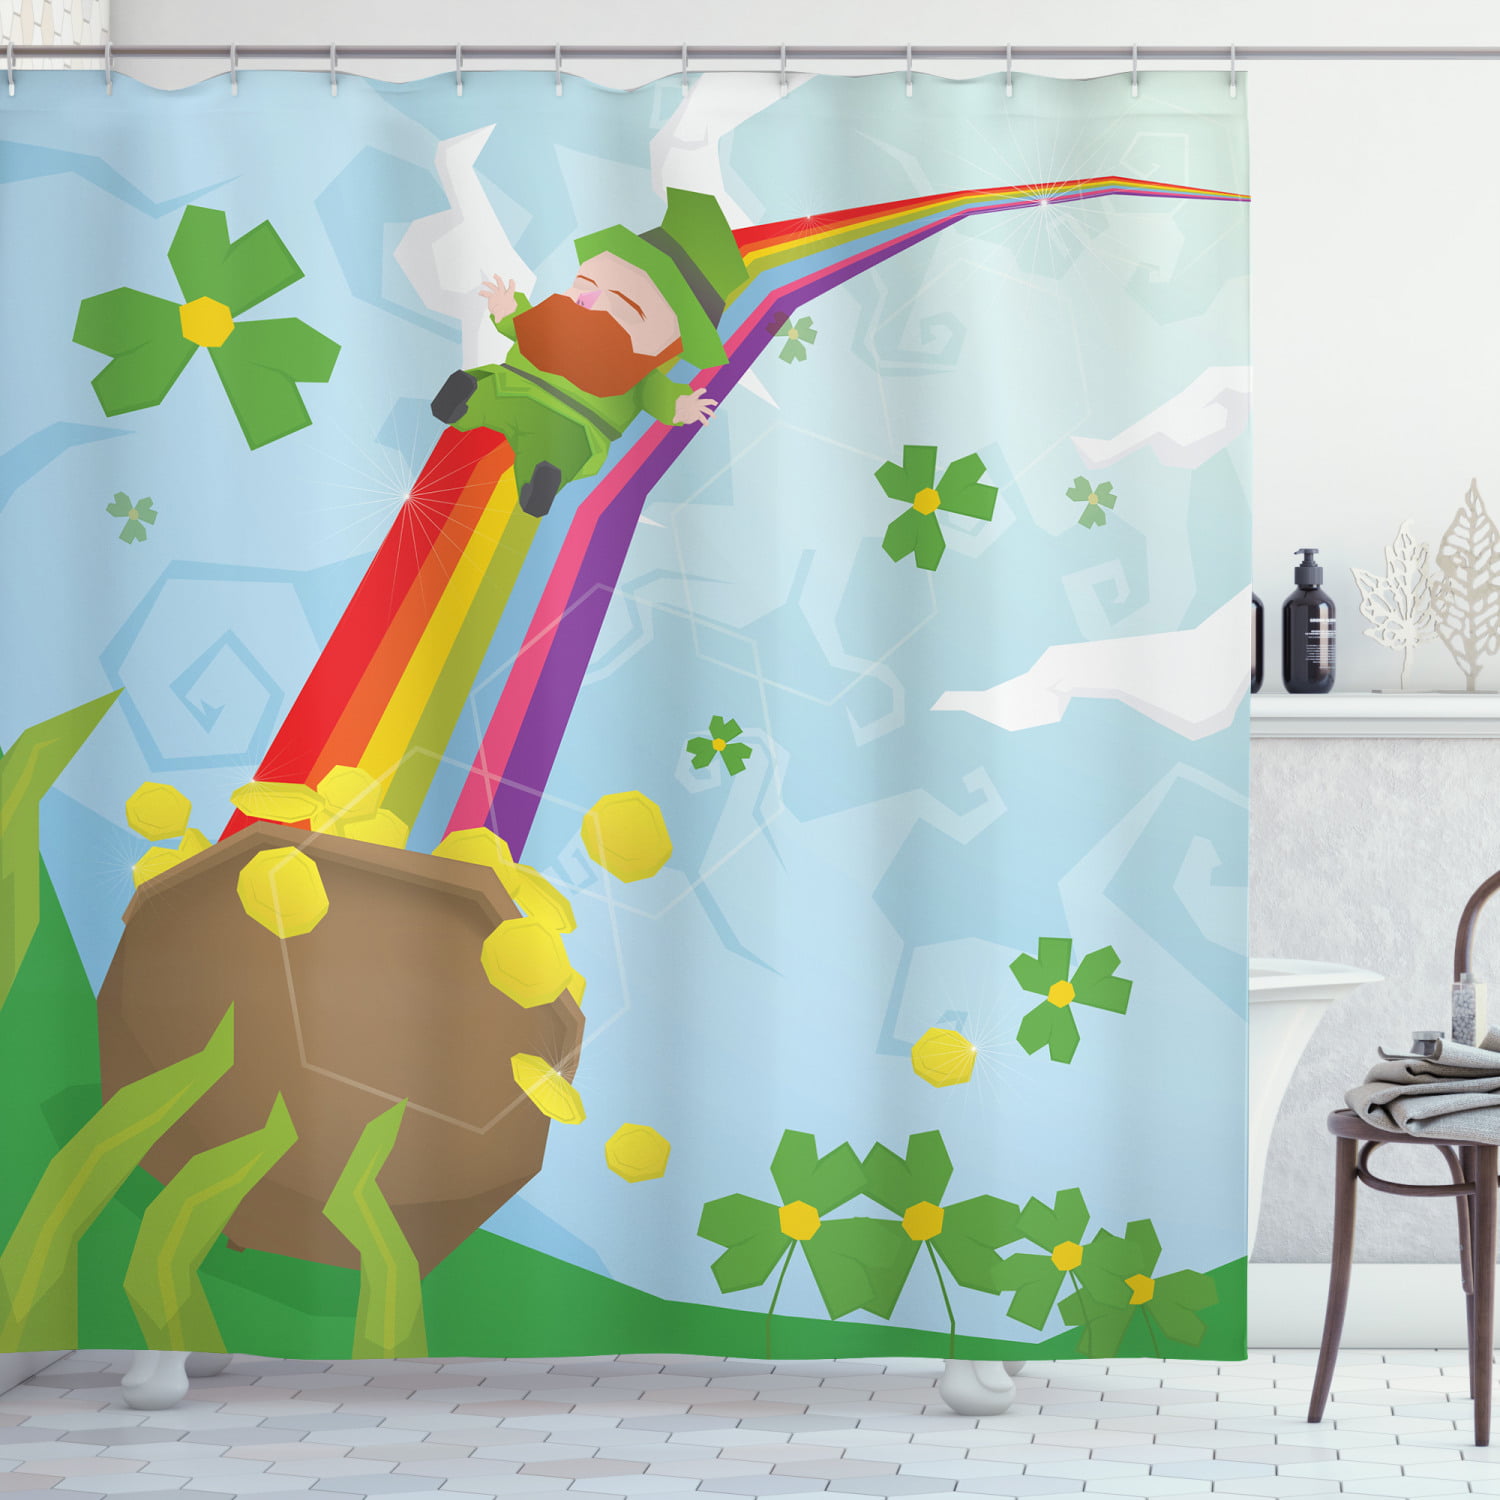 Green Clover Hat For St Patricks Day Bathroom Fabric Shower Curtain 71Inches 